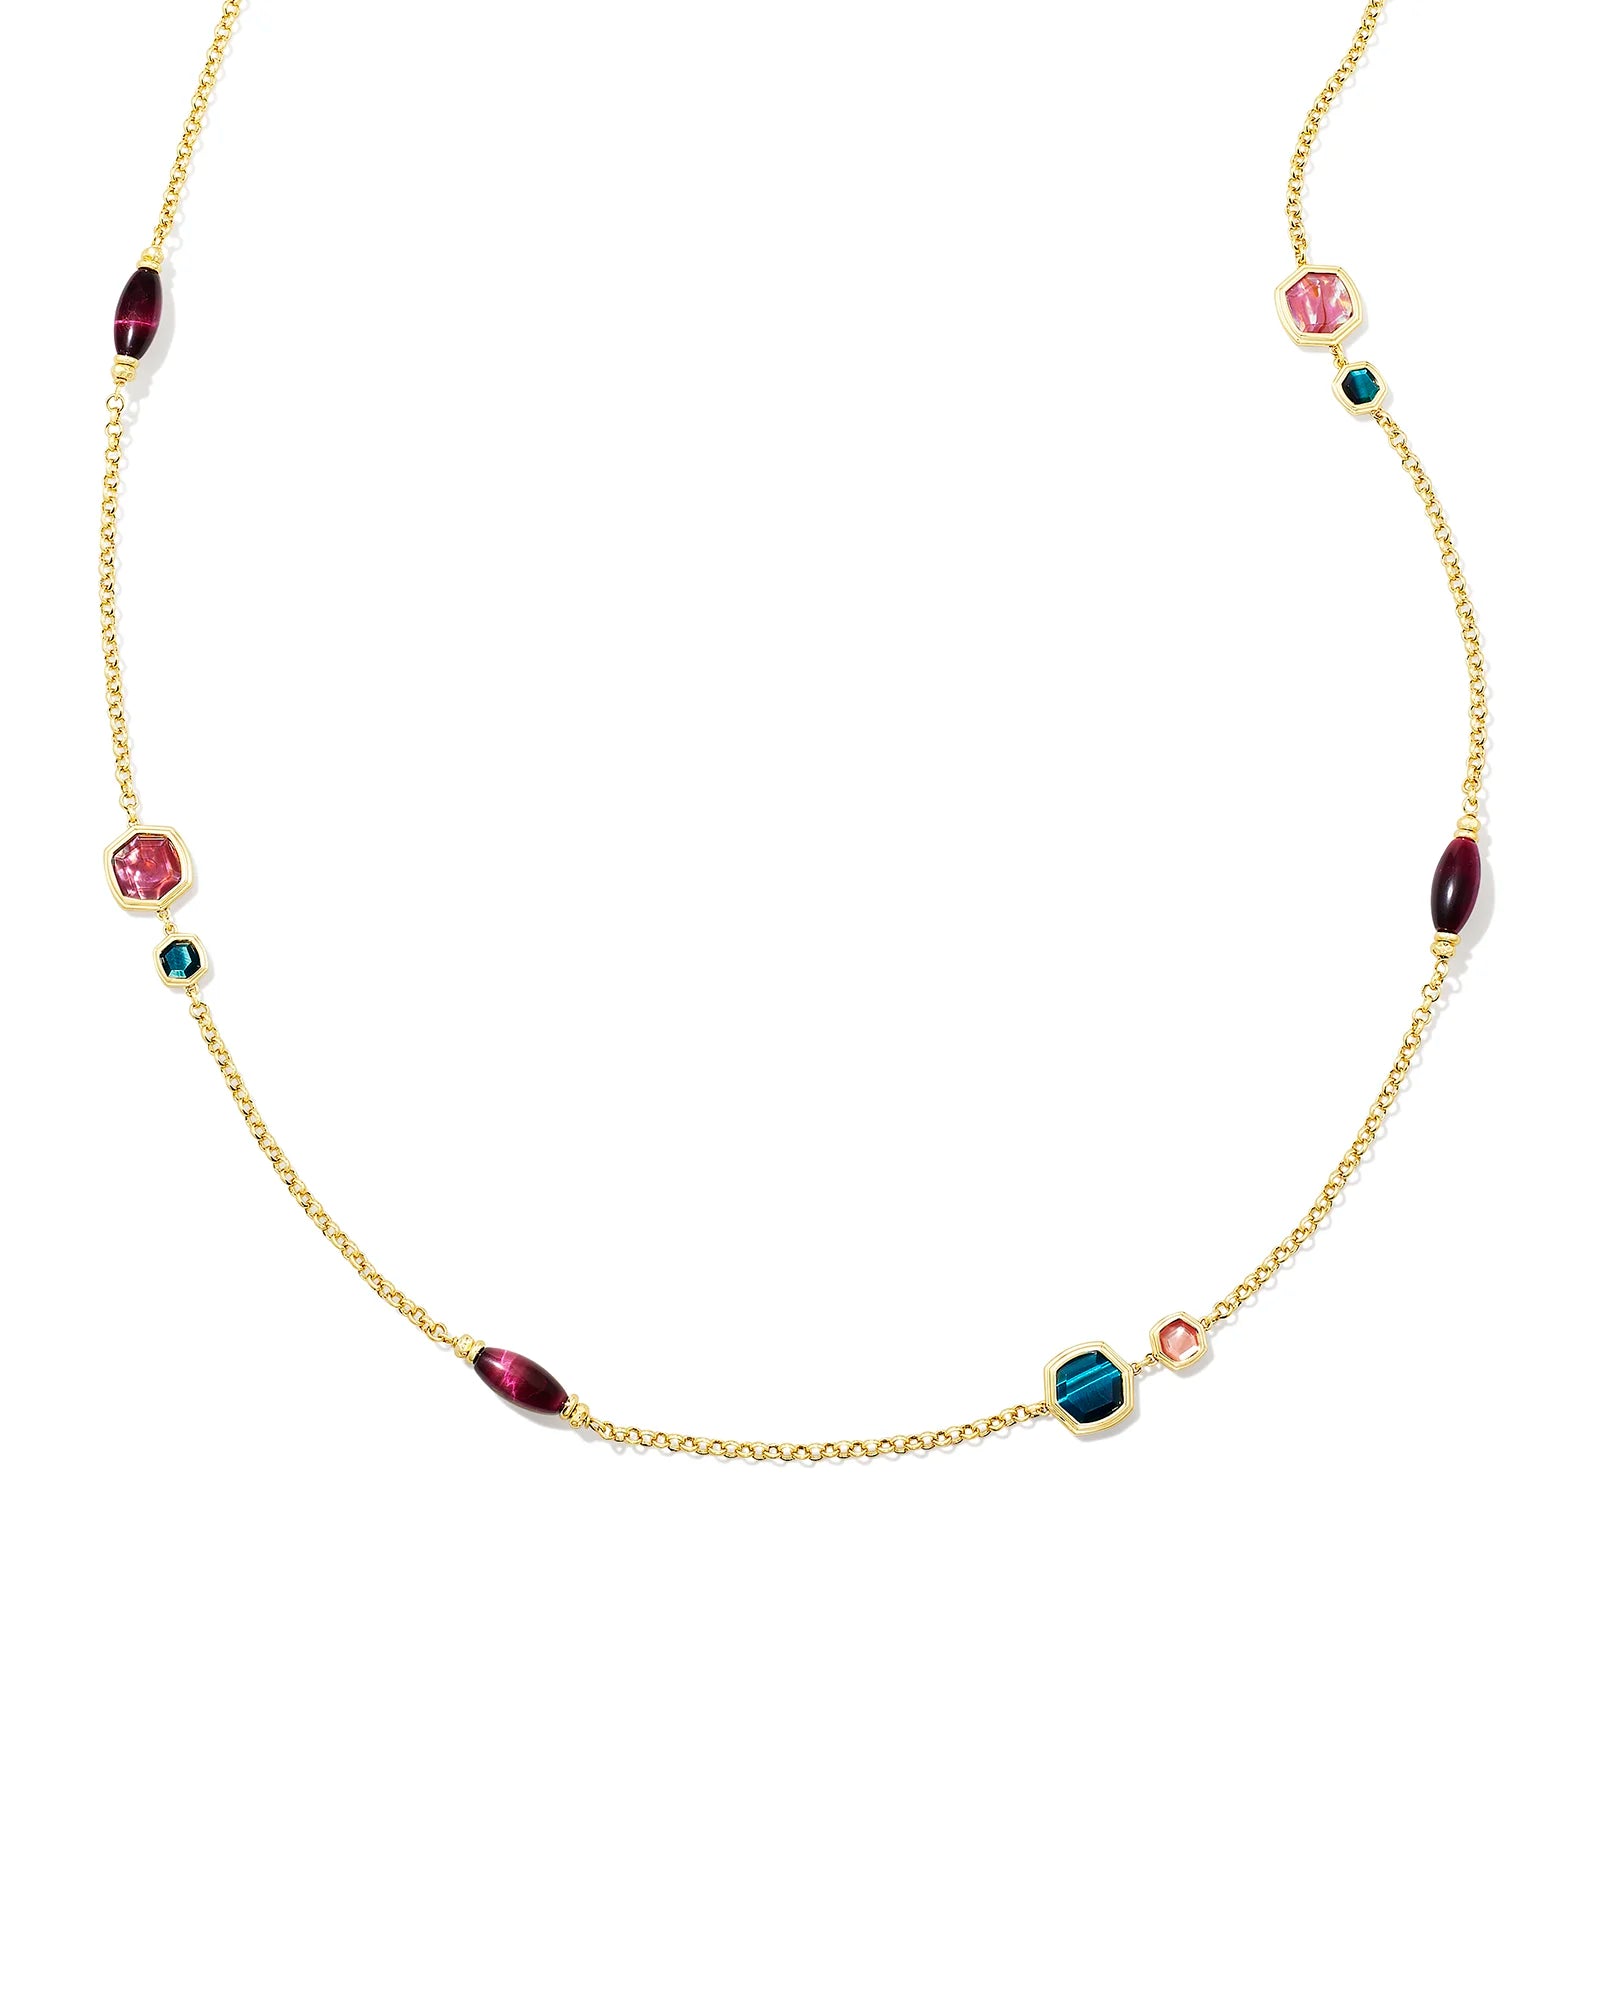 KENDRA SCOTT- Monica Gold Long Strand Necklace in Teal Mix